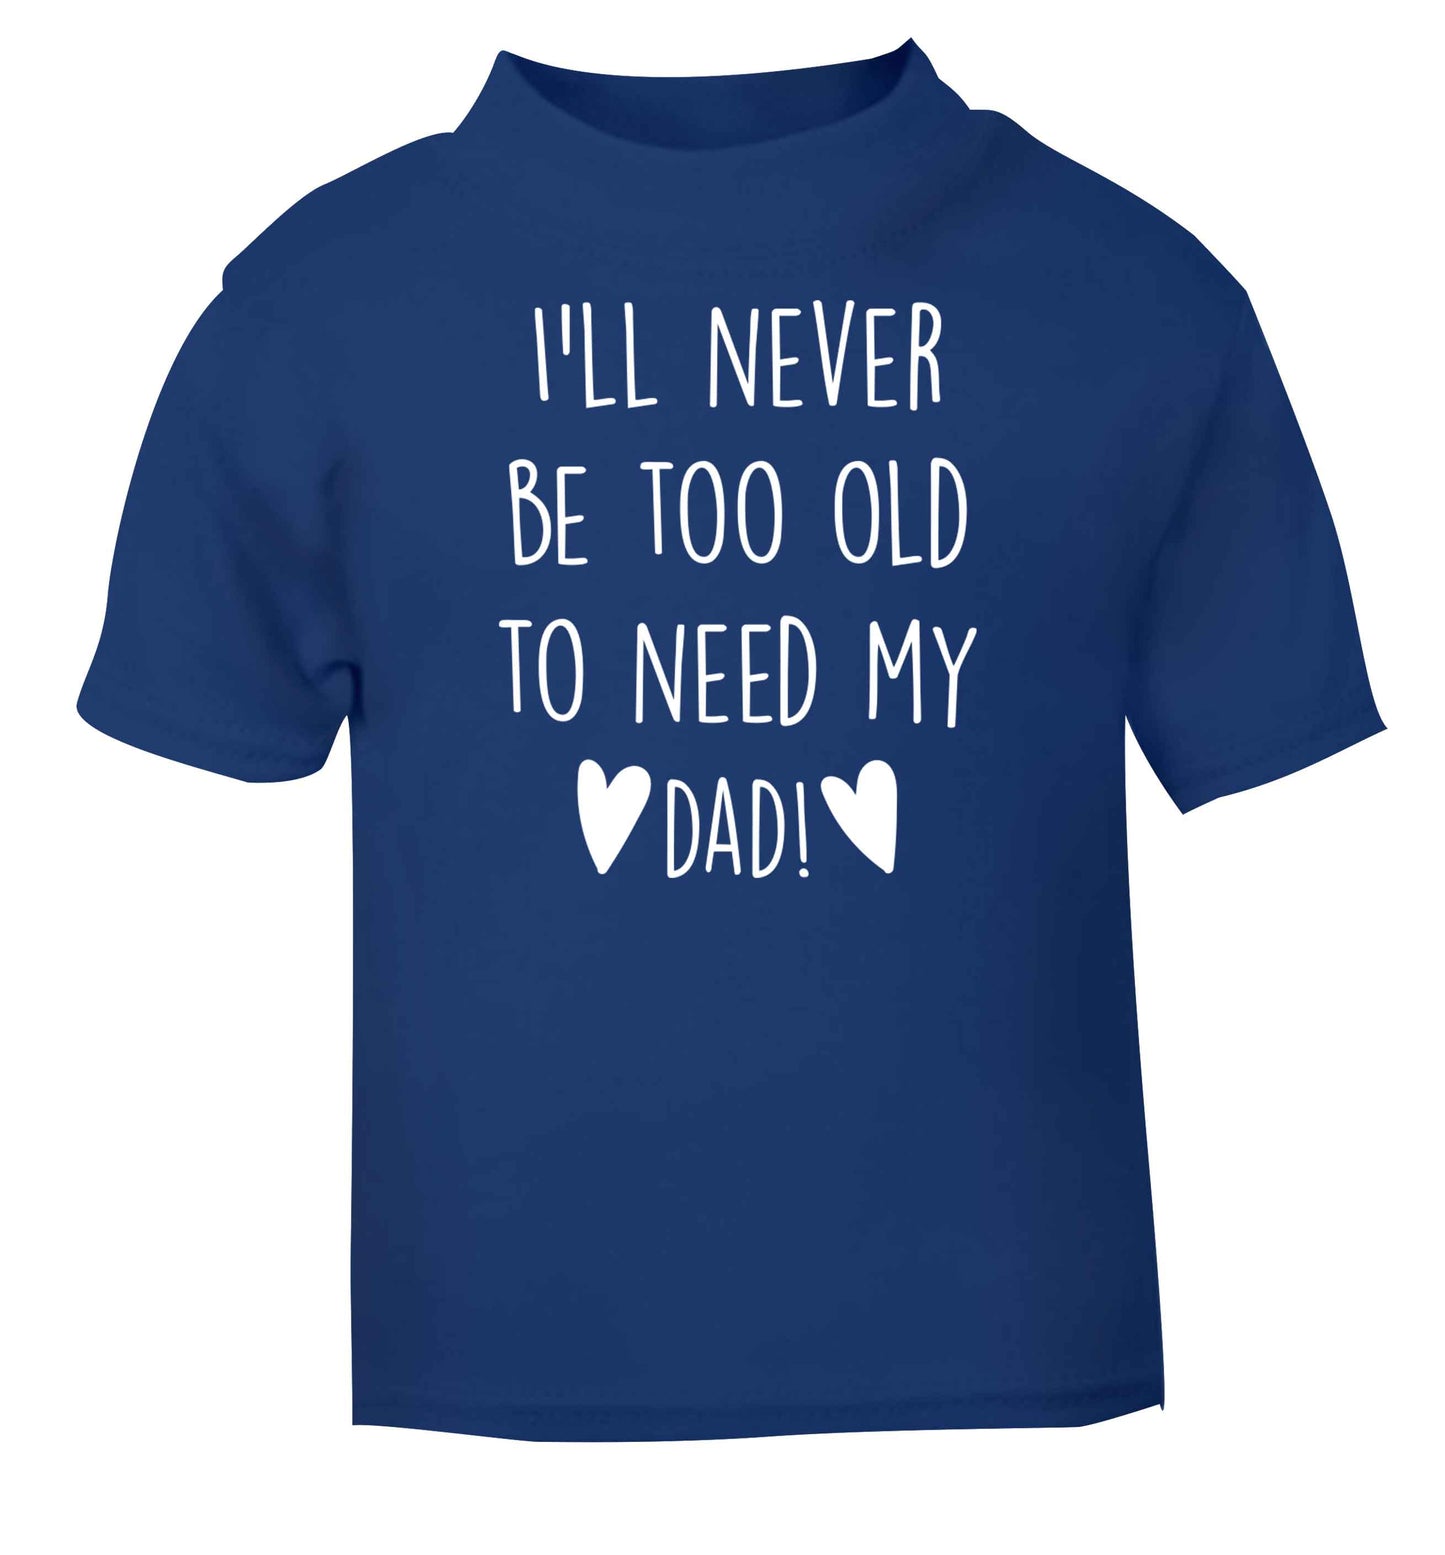 I'll never be too old to need my dad blue baby toddler Tshirt 2 Years